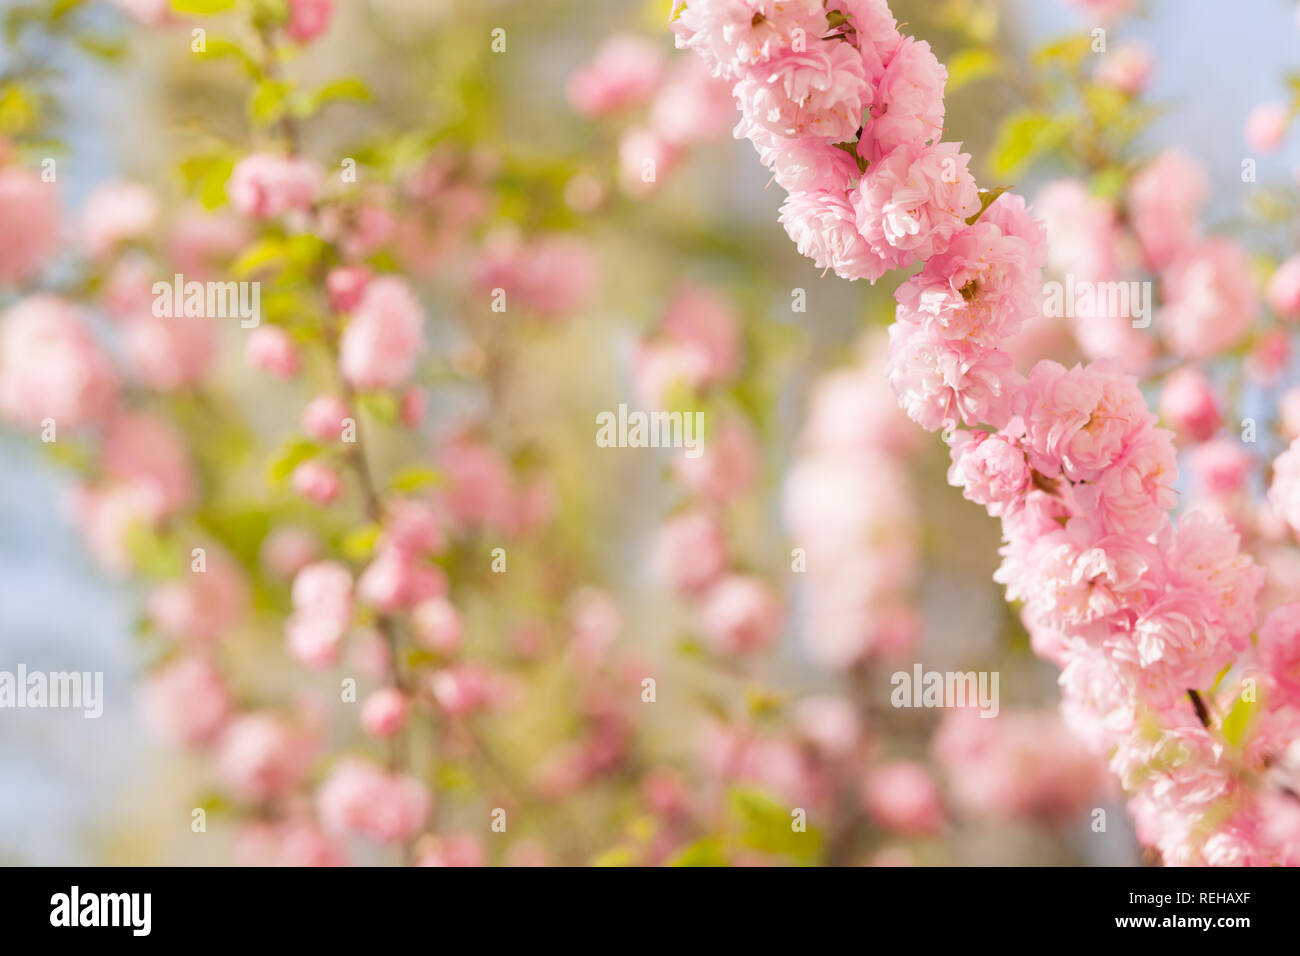 a branch with beautiful pink flowers on natural defocused  background. Amygdalus triloba. very shallow depth of field. Stock Photo